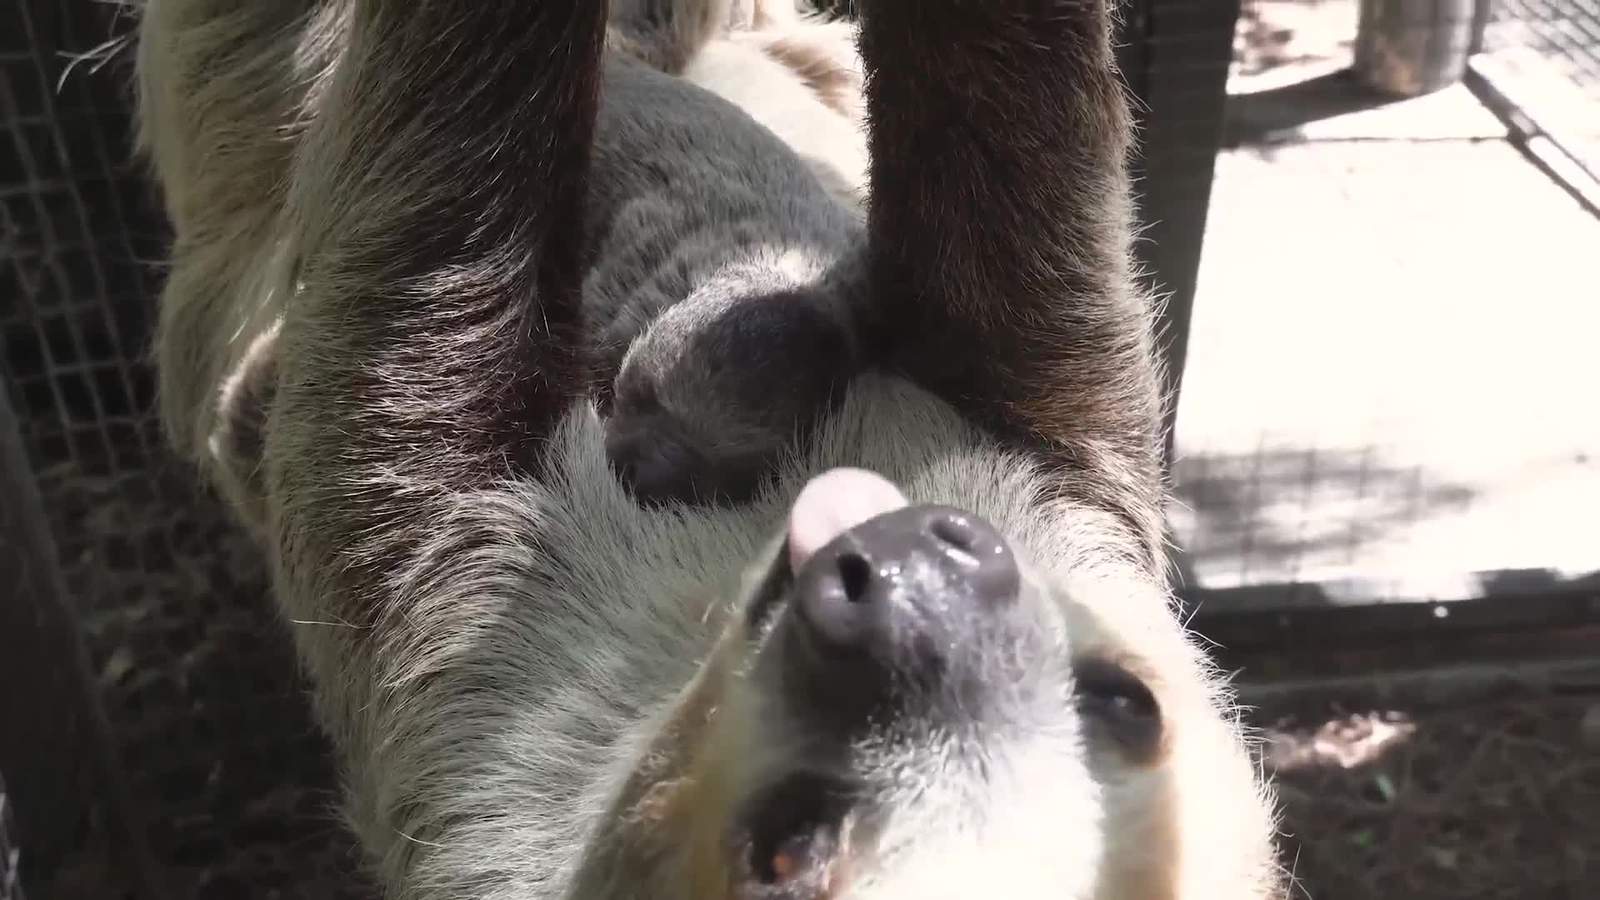 First look: Adorable baby sloth born at Brevard Zoo